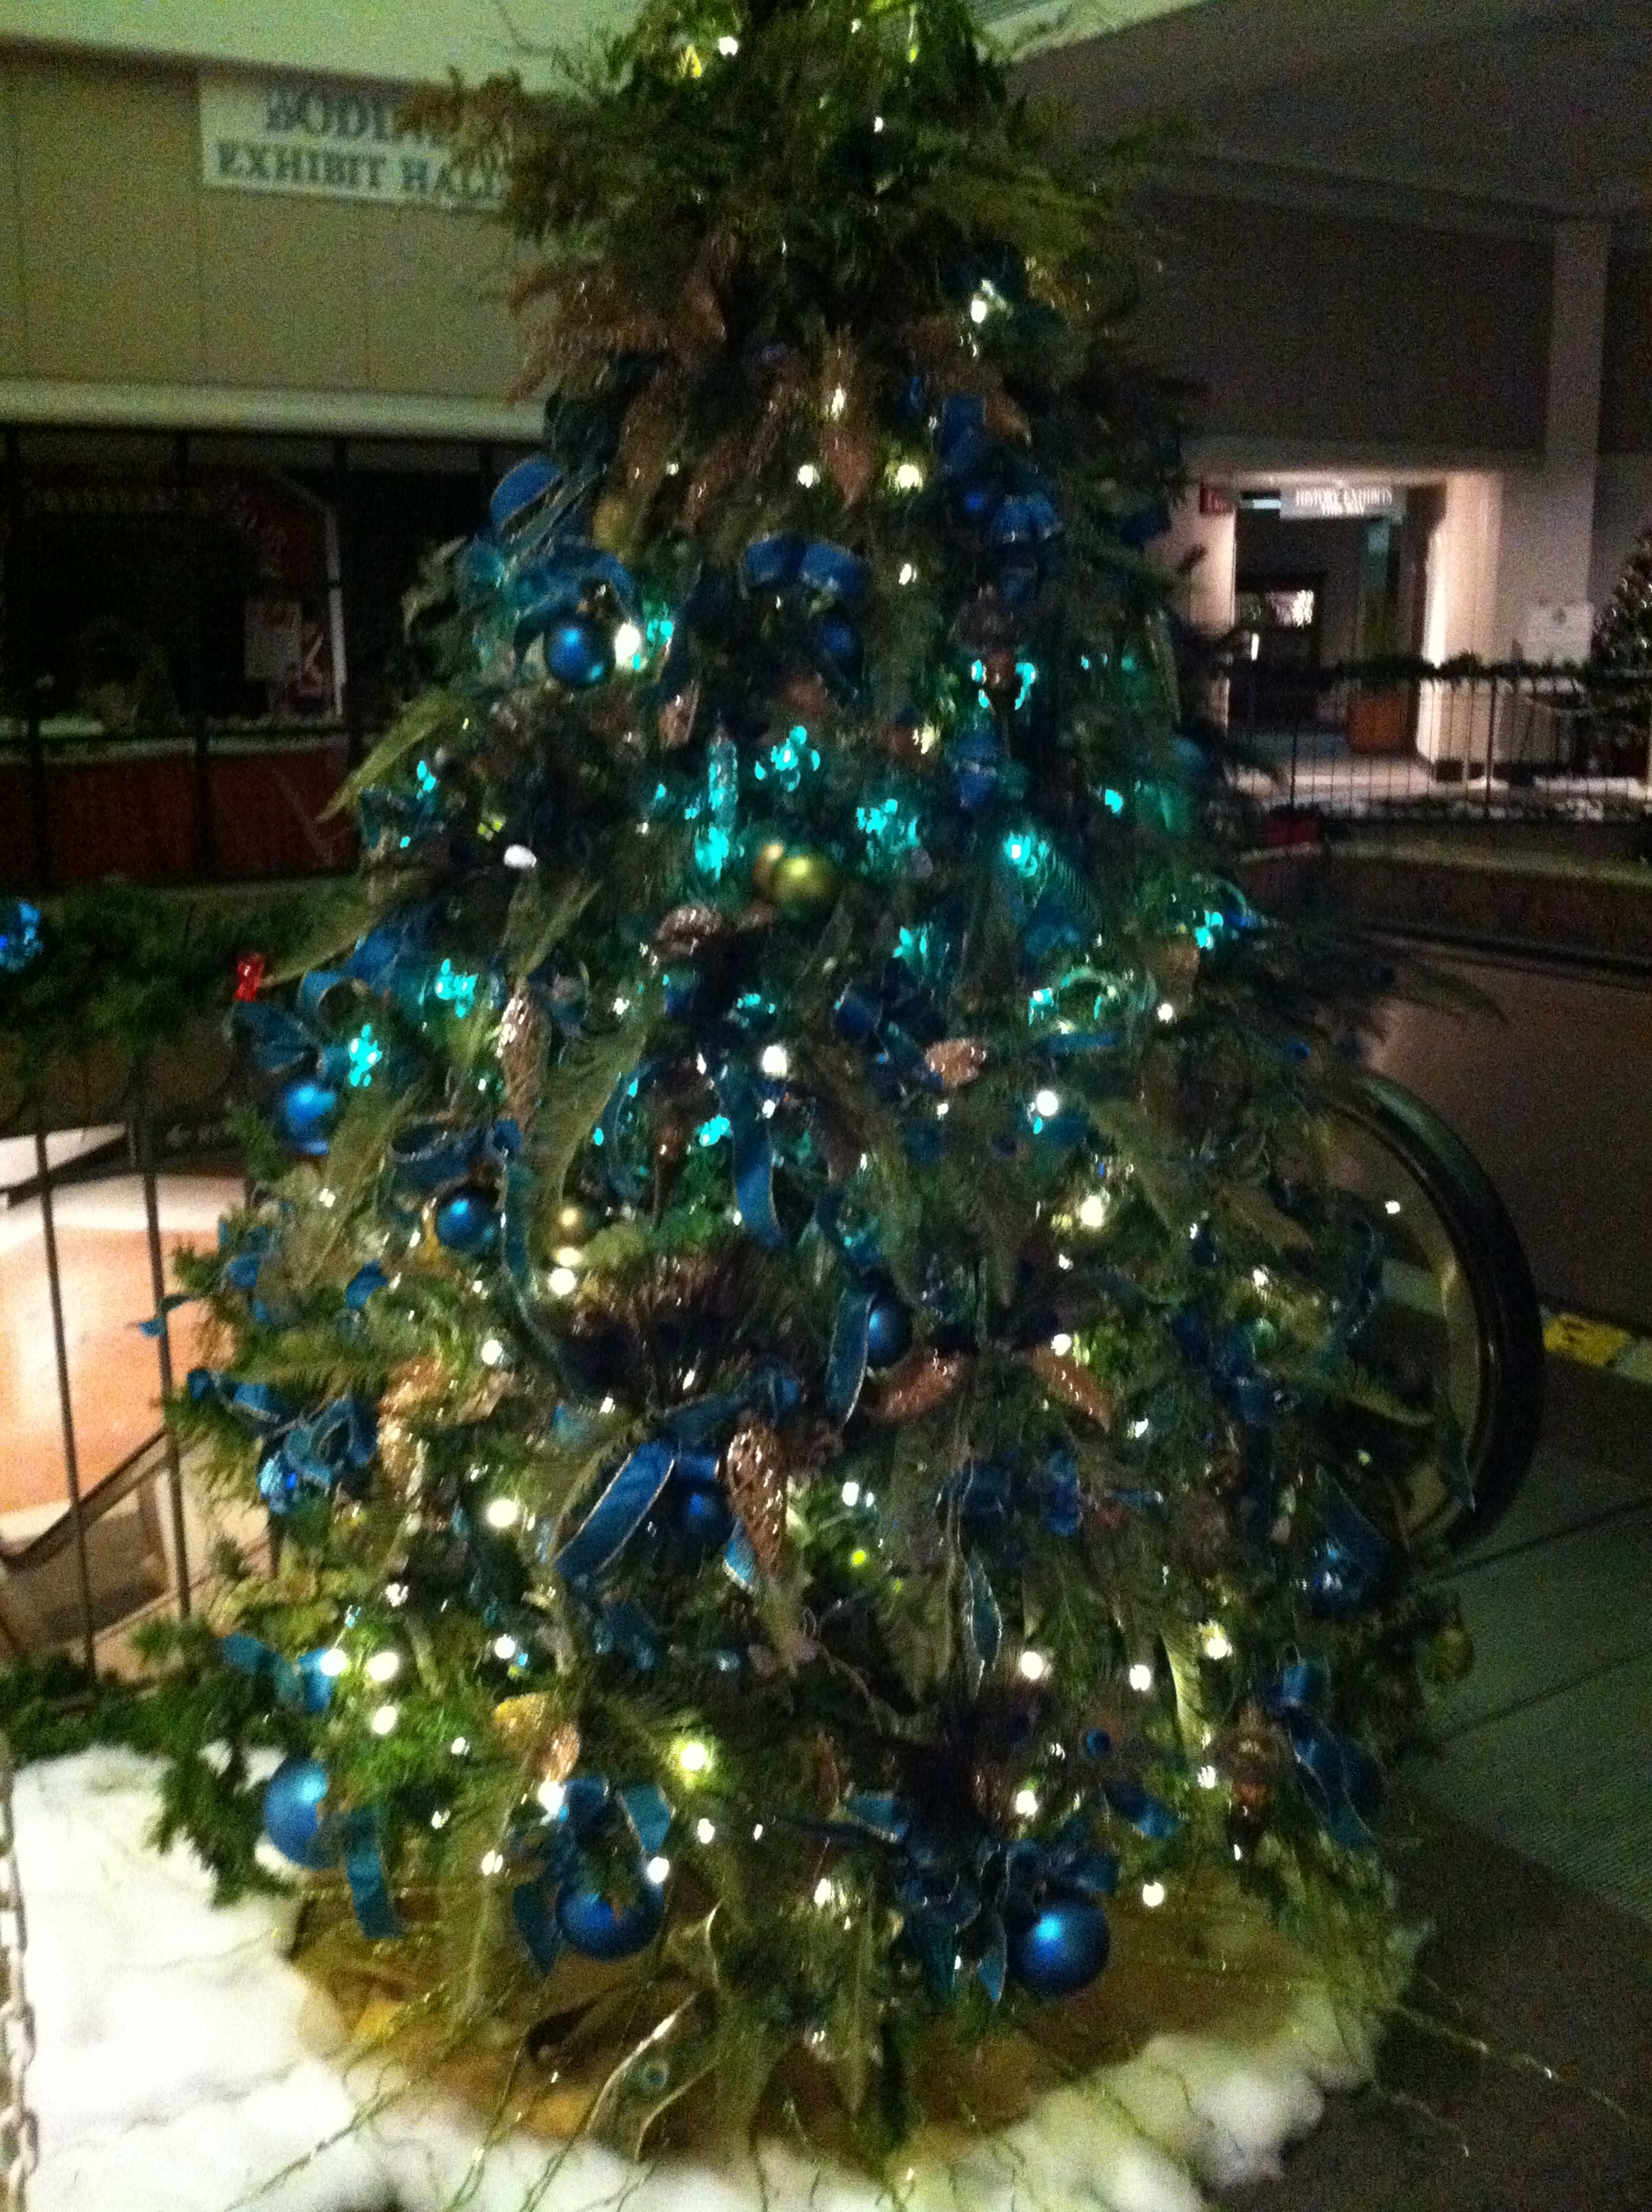 The Peacock Tree fully decorated